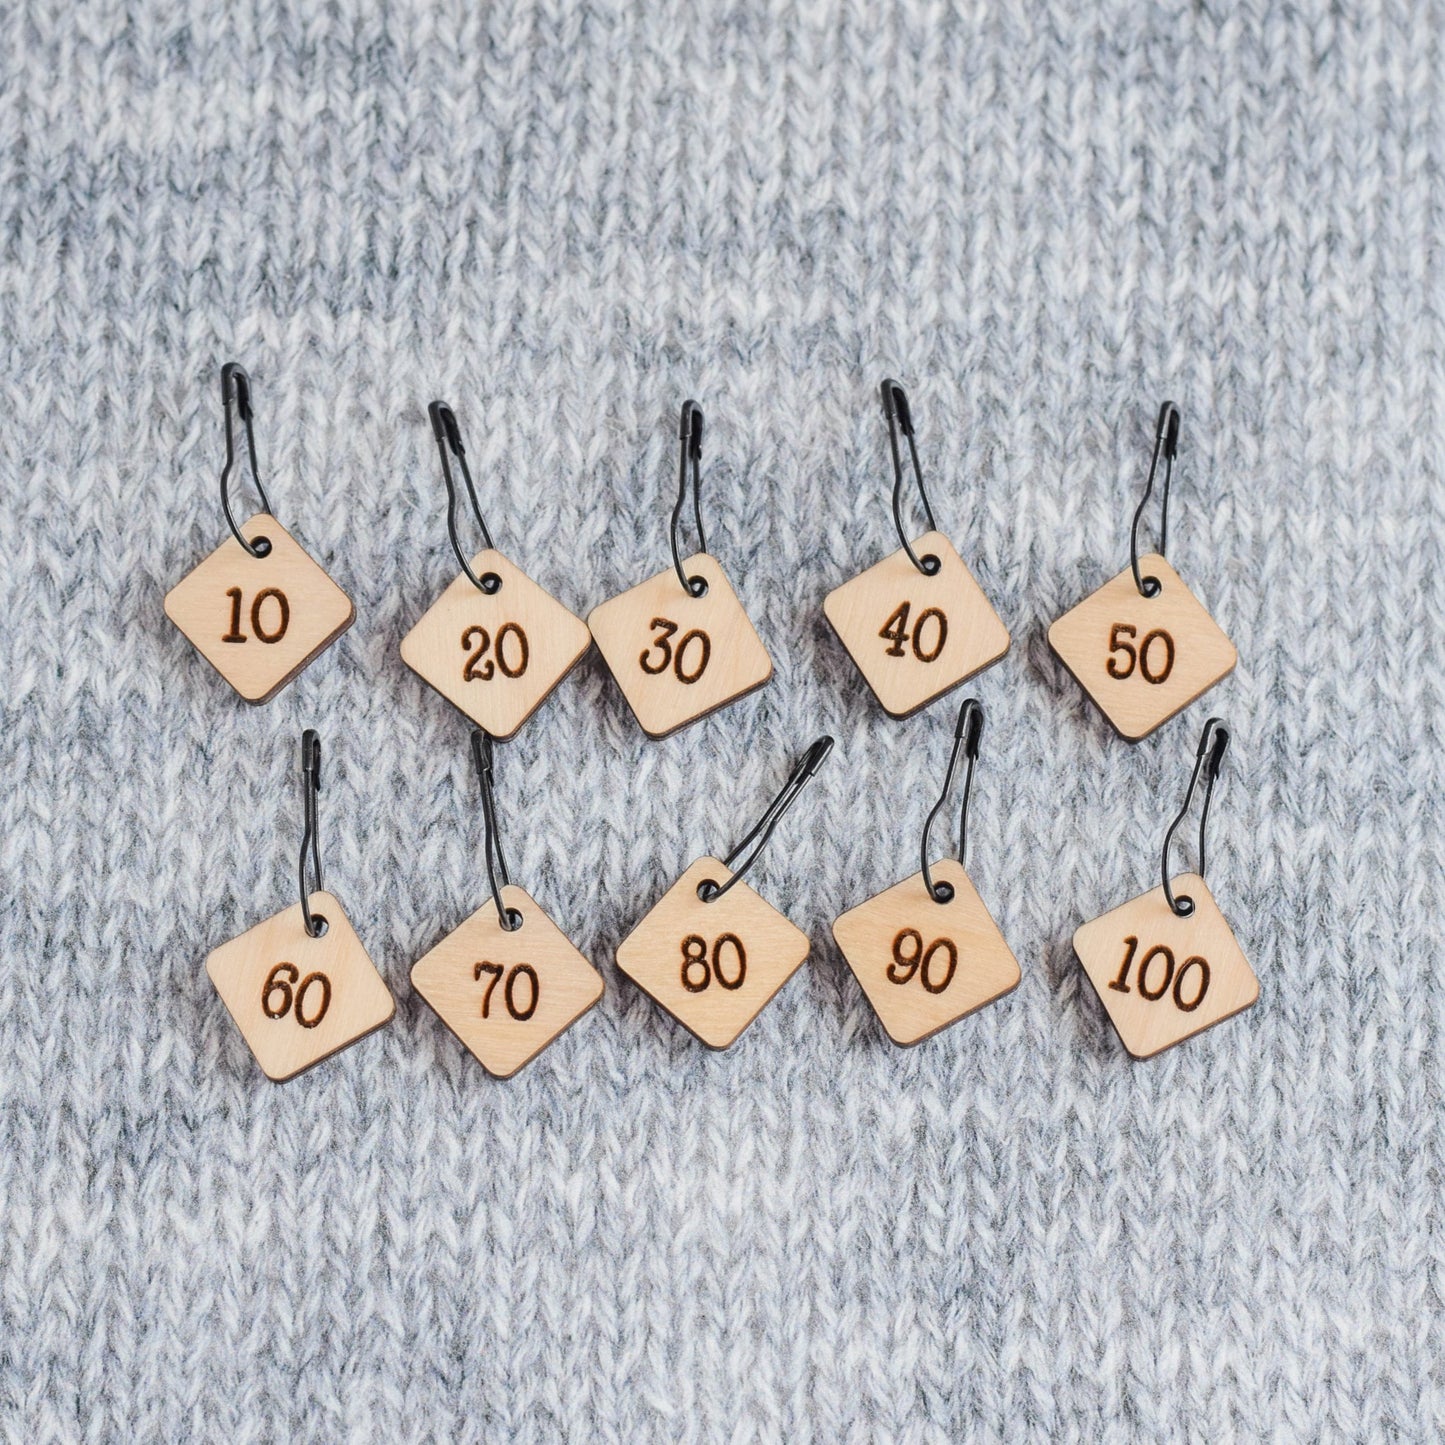 Set of 10 Removable Stitch Markers - 10-100 - Cast On Counting Numbers, Laser Engraved Wood Stitch Markers, Counting Stitch Markers - Birch